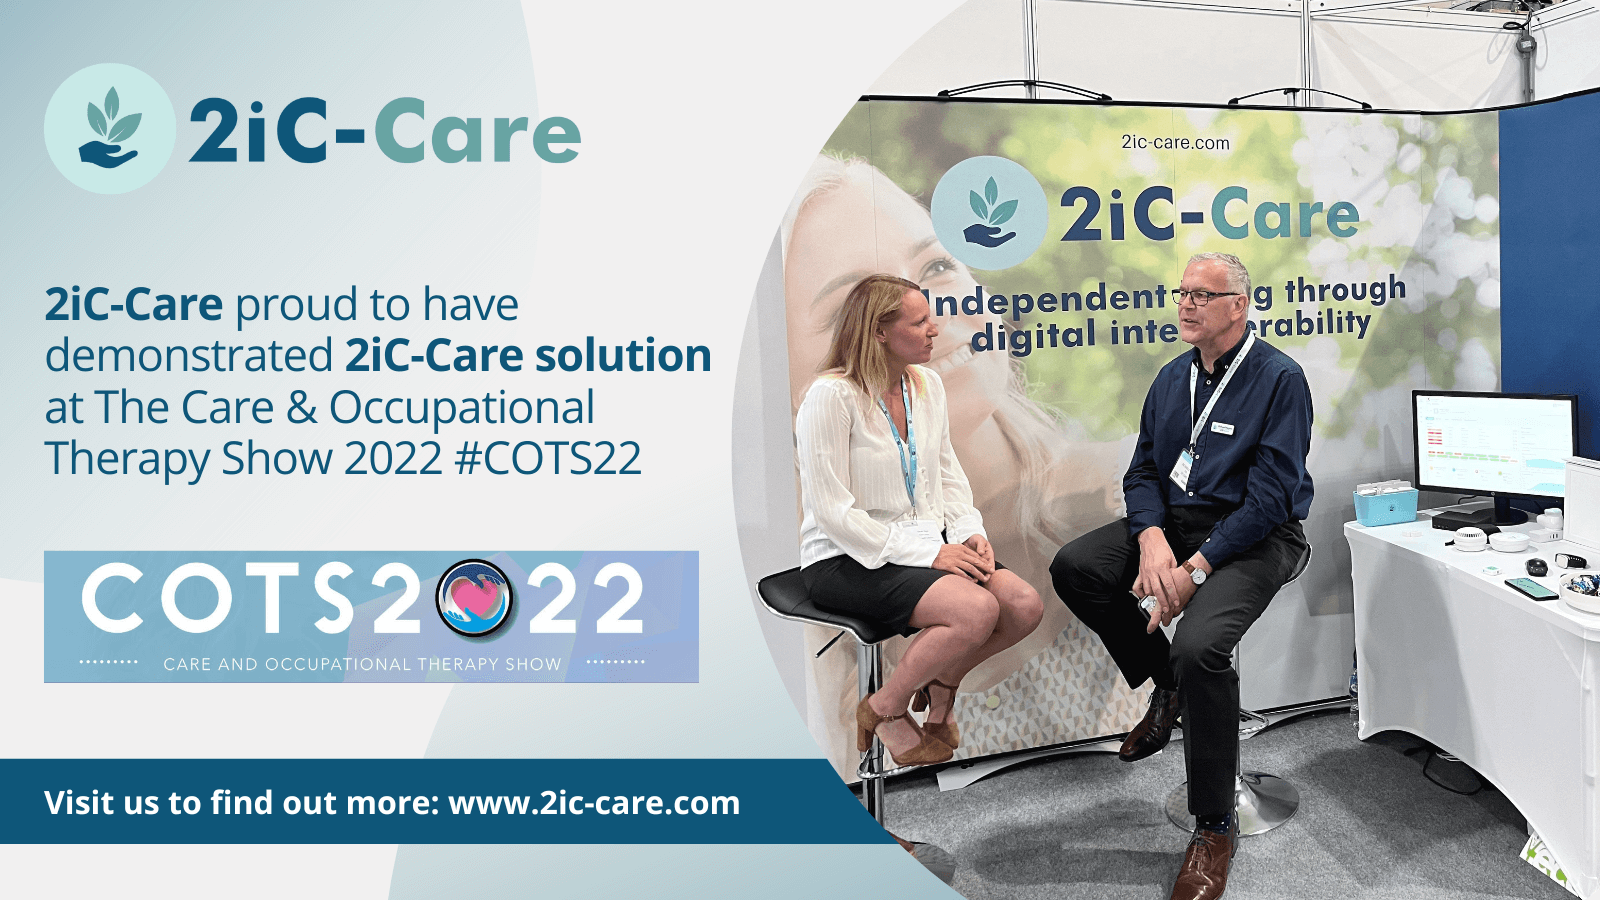 2iC-Care exhibited TEC solution at COTS22 Exhibition